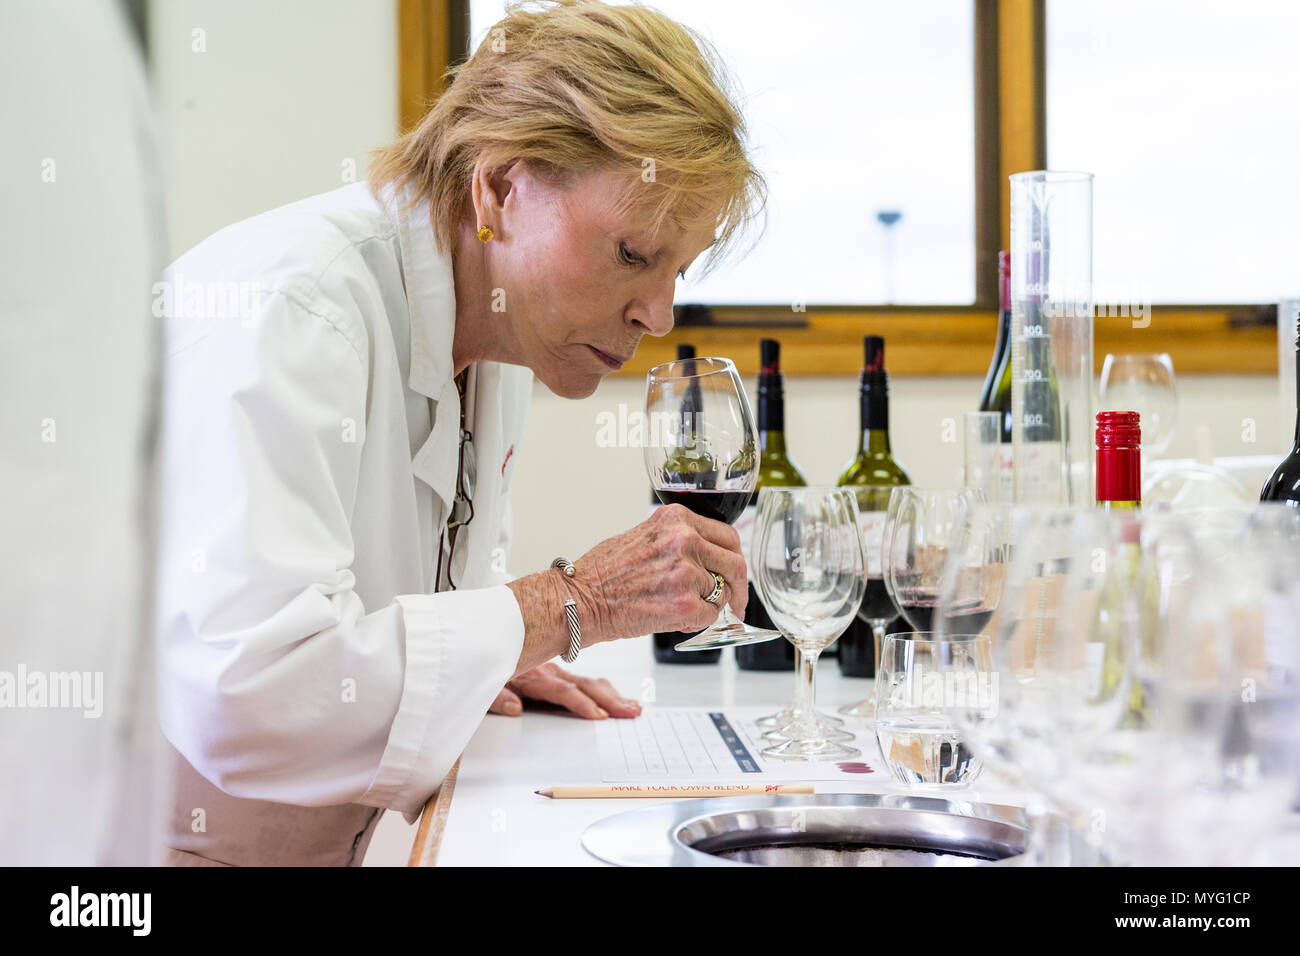 A woman samples the aroma of a red wine blend she is creating in a laboratory. Stock Photo